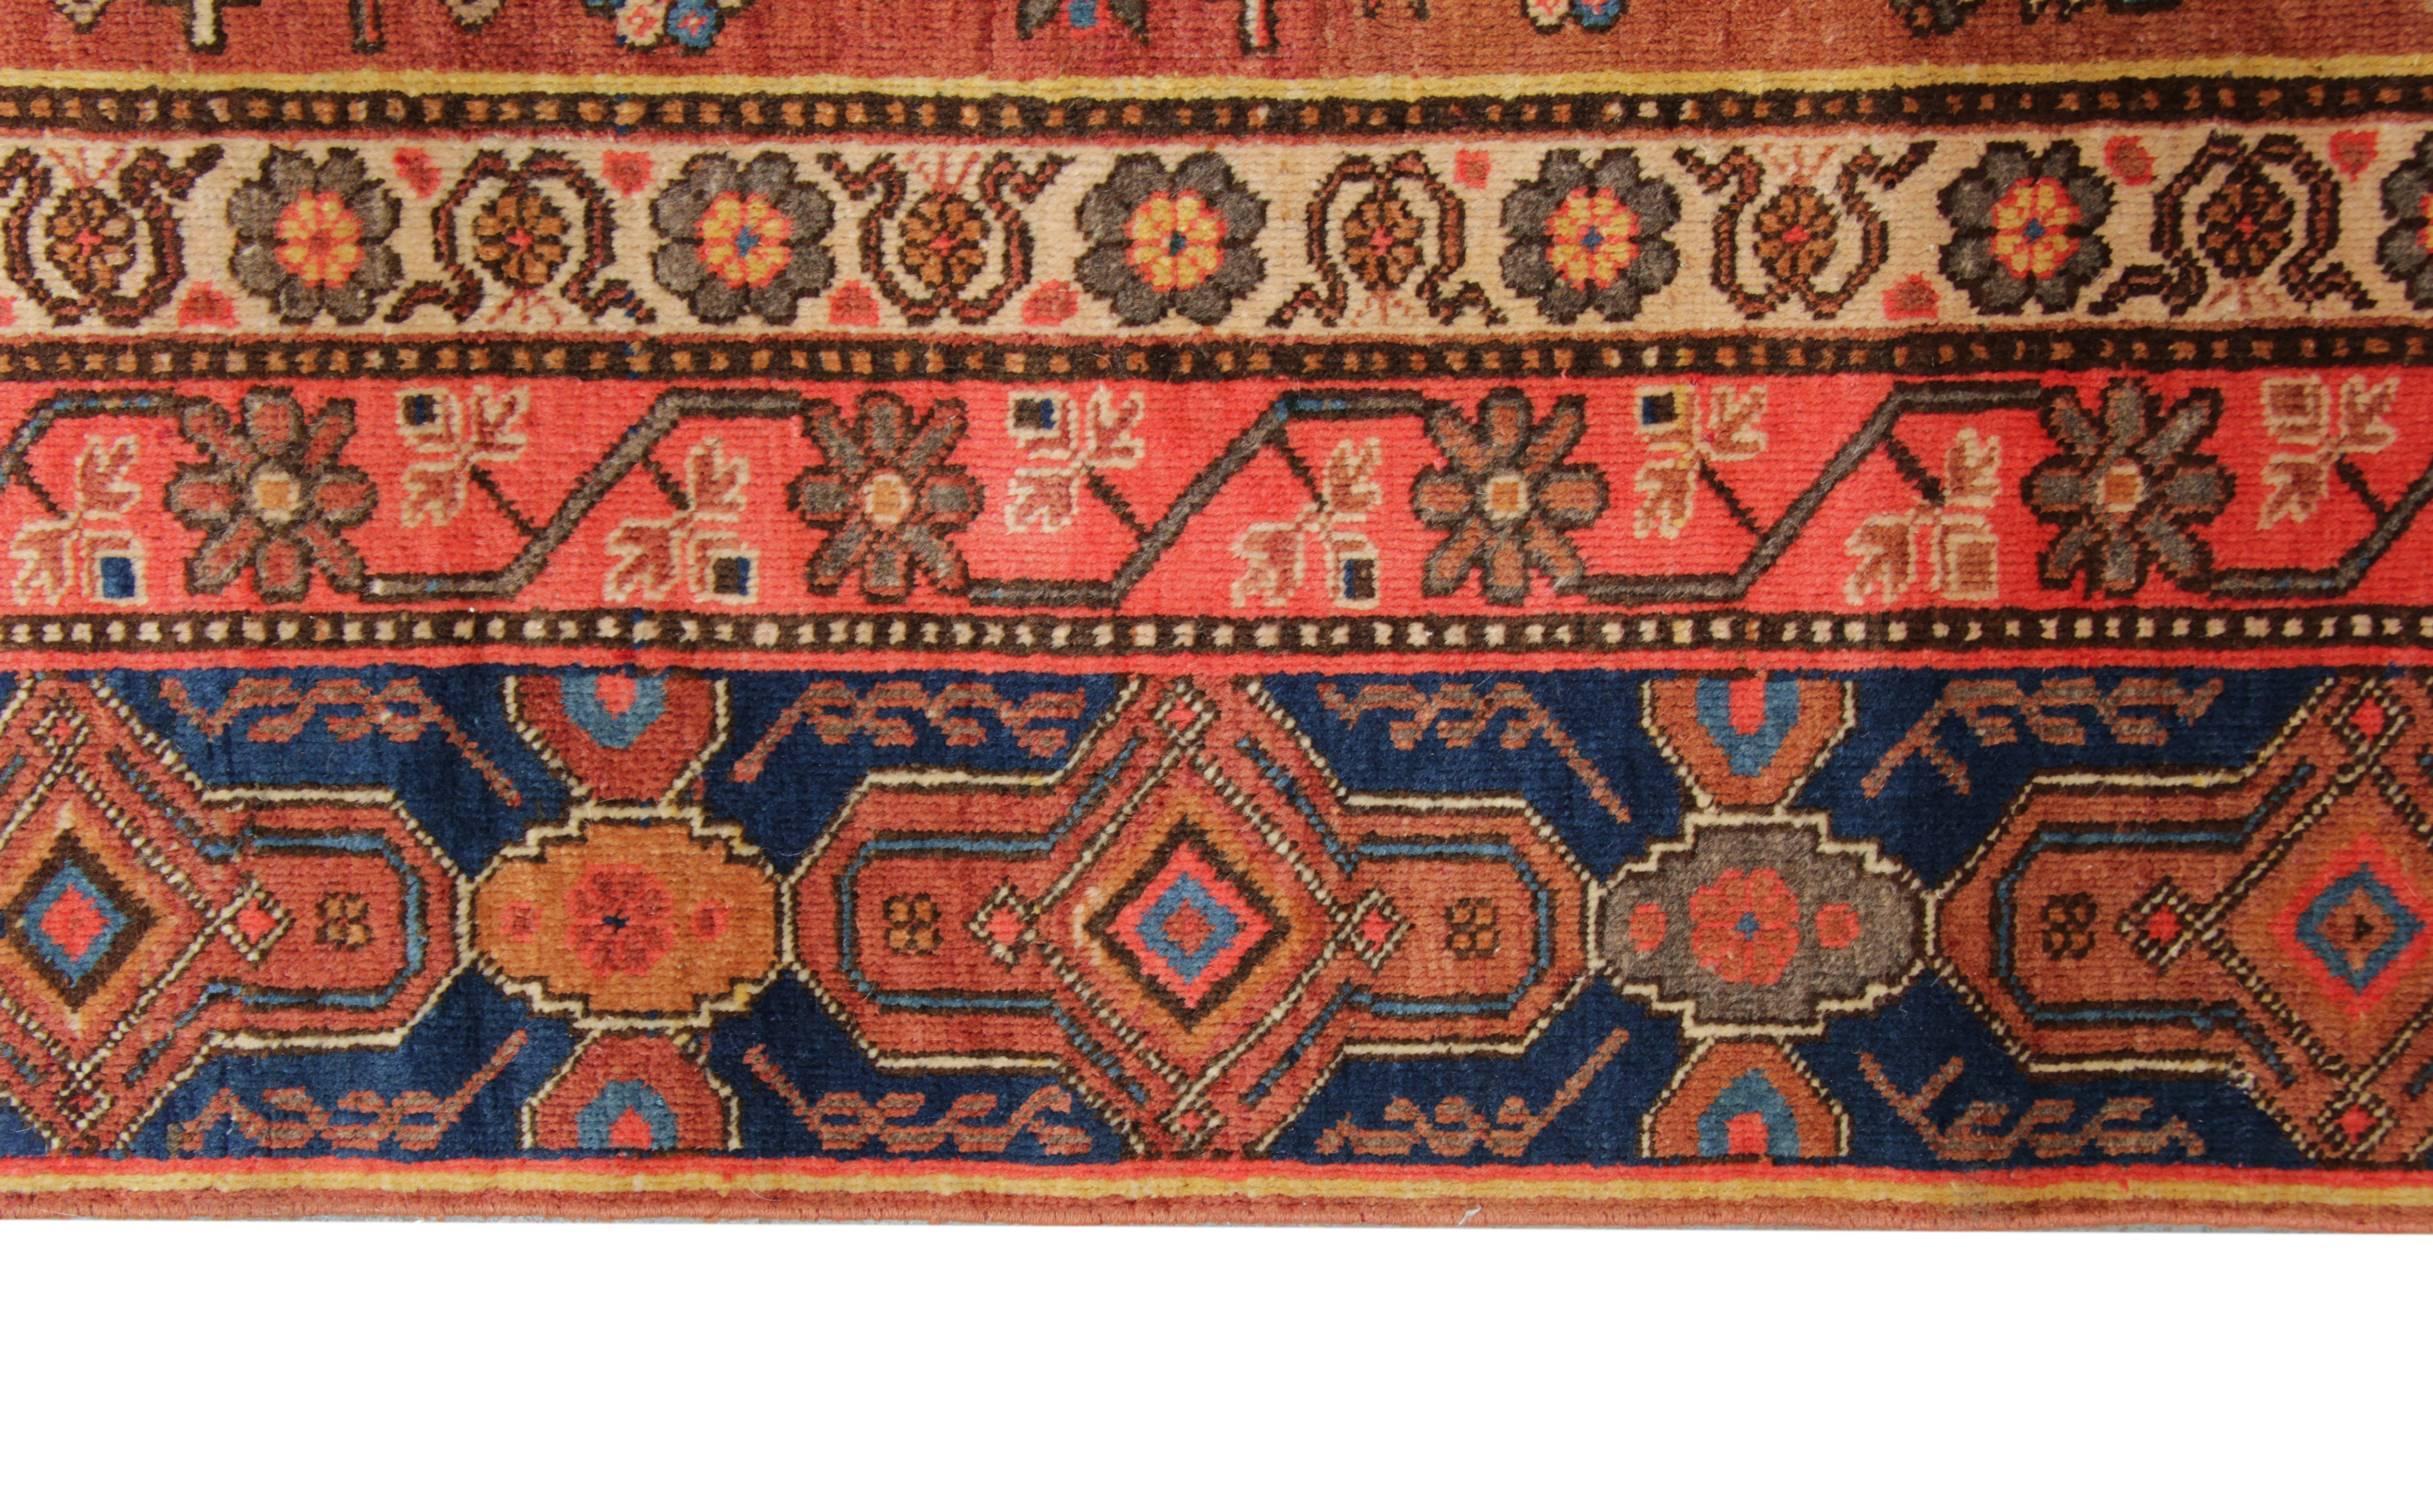 Rustic Rare Antique Rugs, Oriental Rugs Traditional Red Handmade Carpet from Khotan